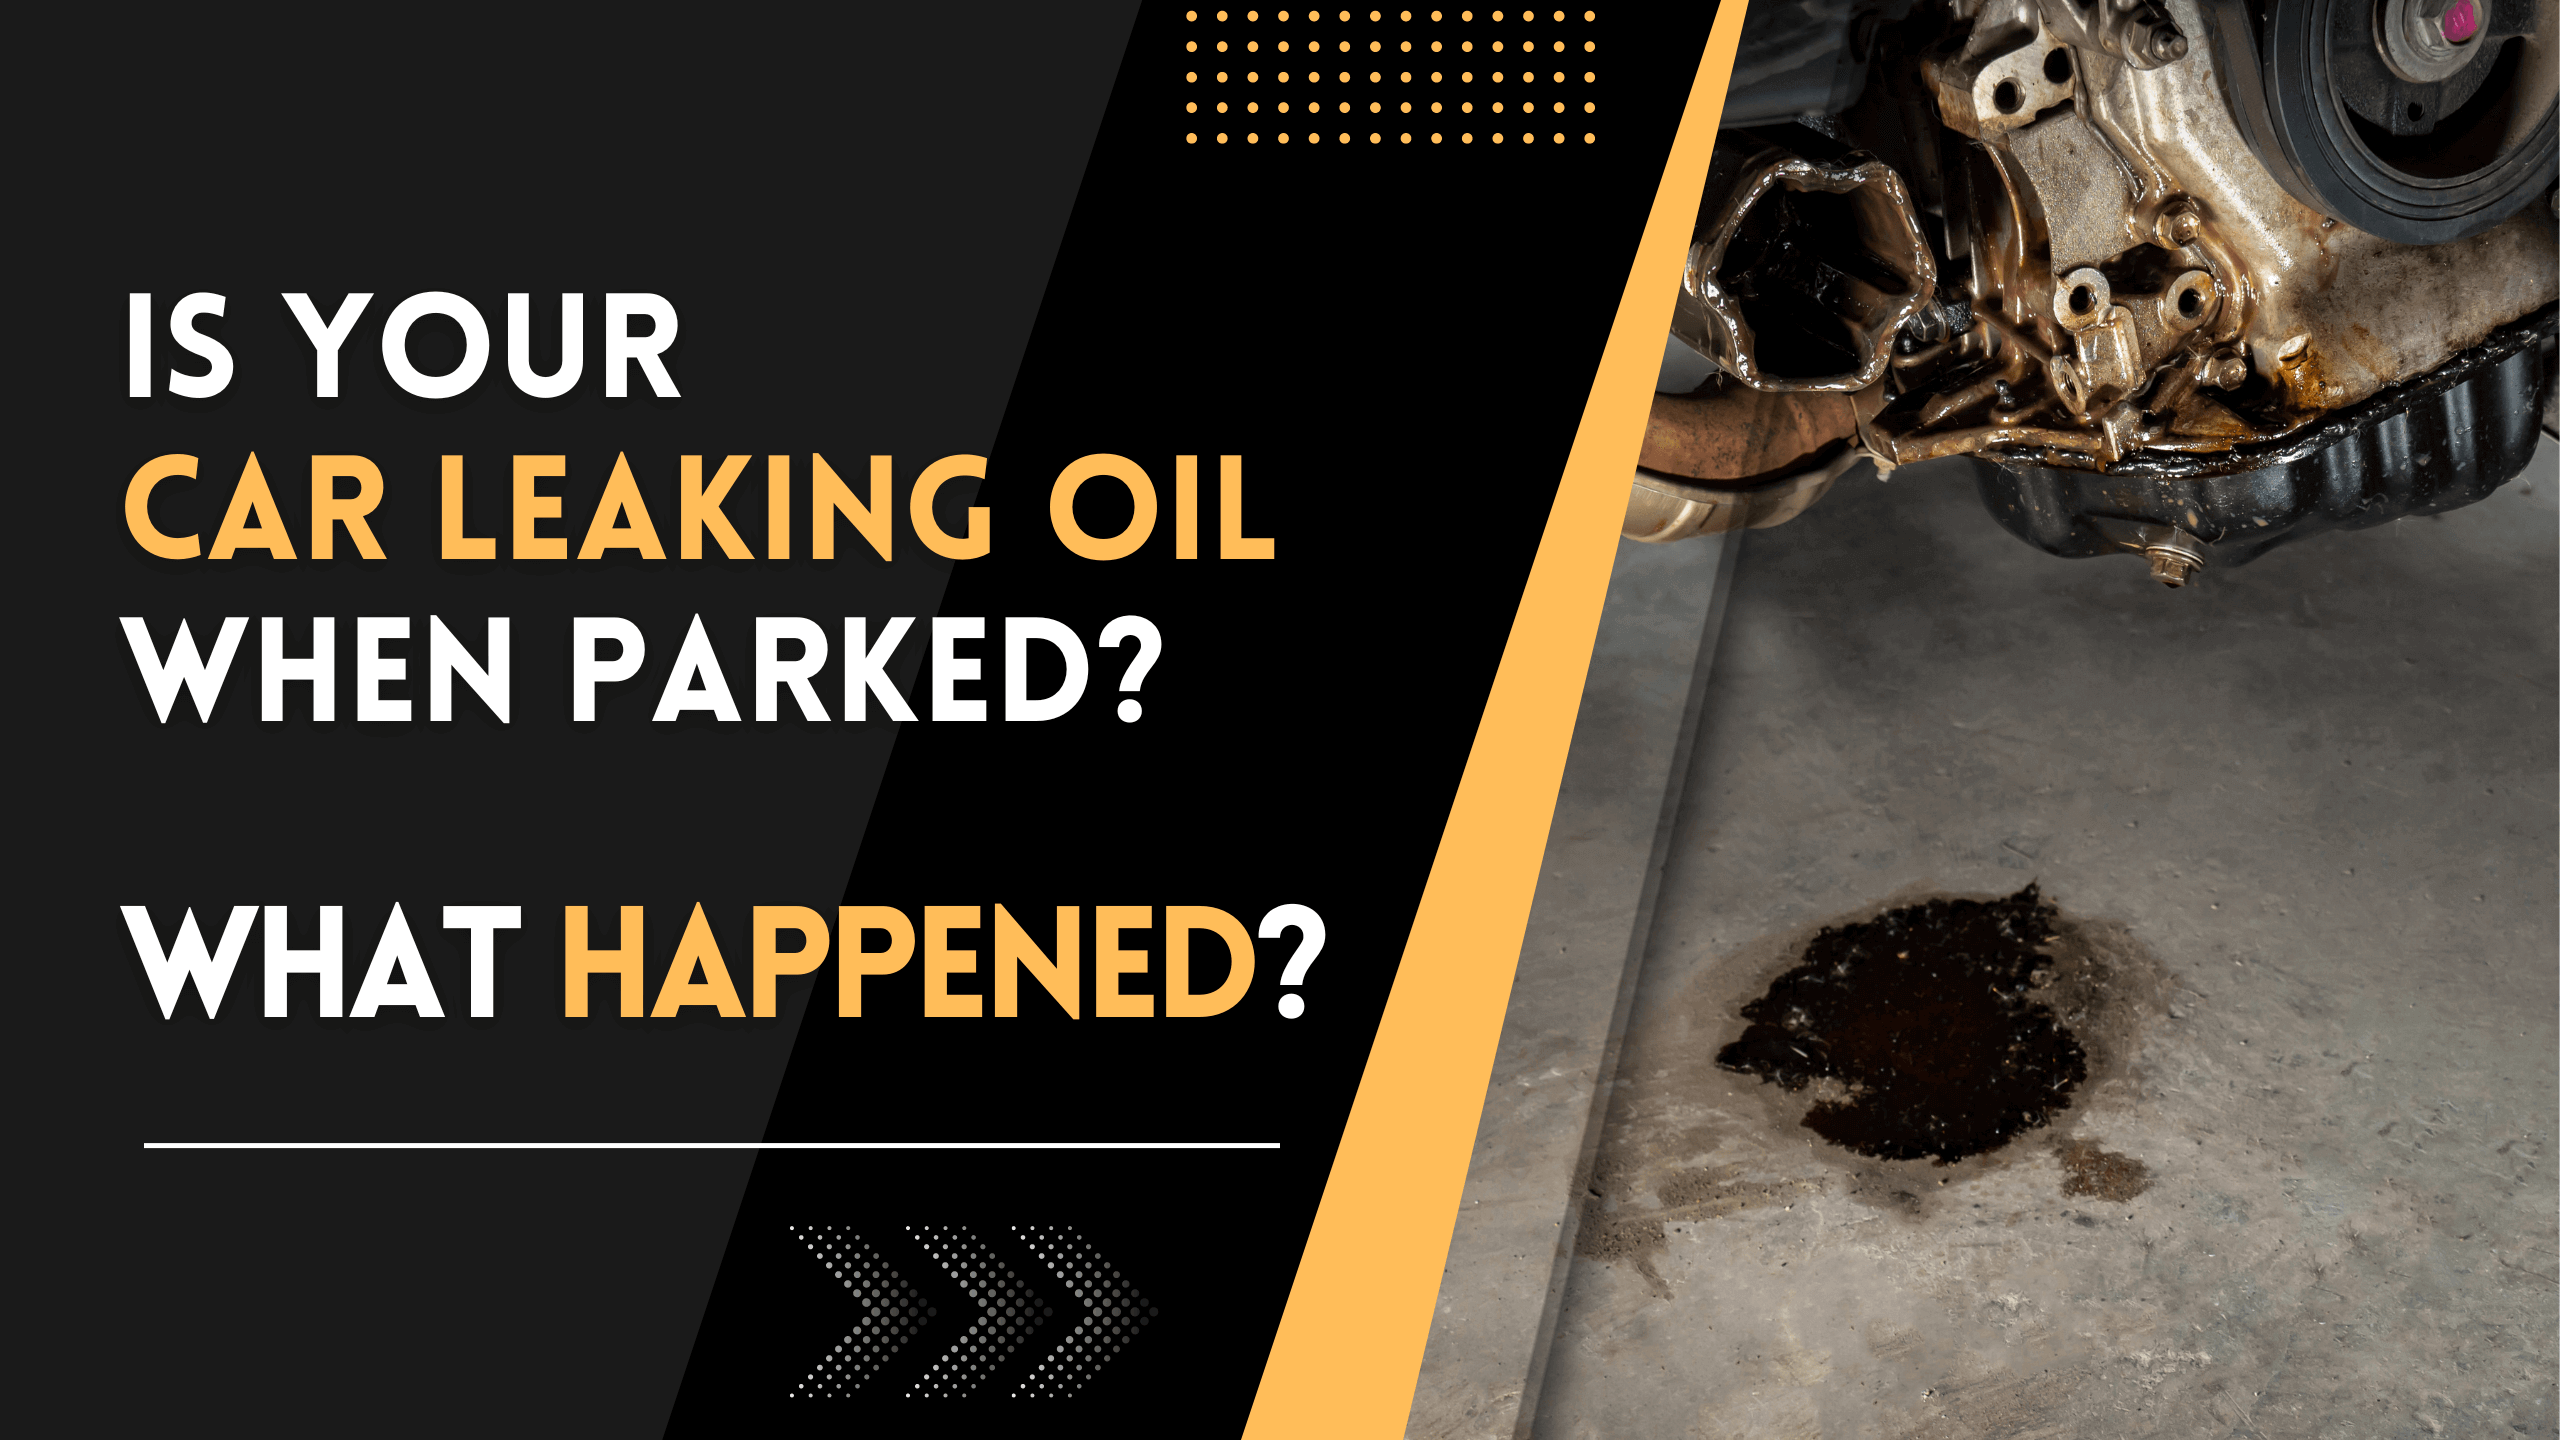 Is Your Car Leaking Oil When Parked? What Happened?